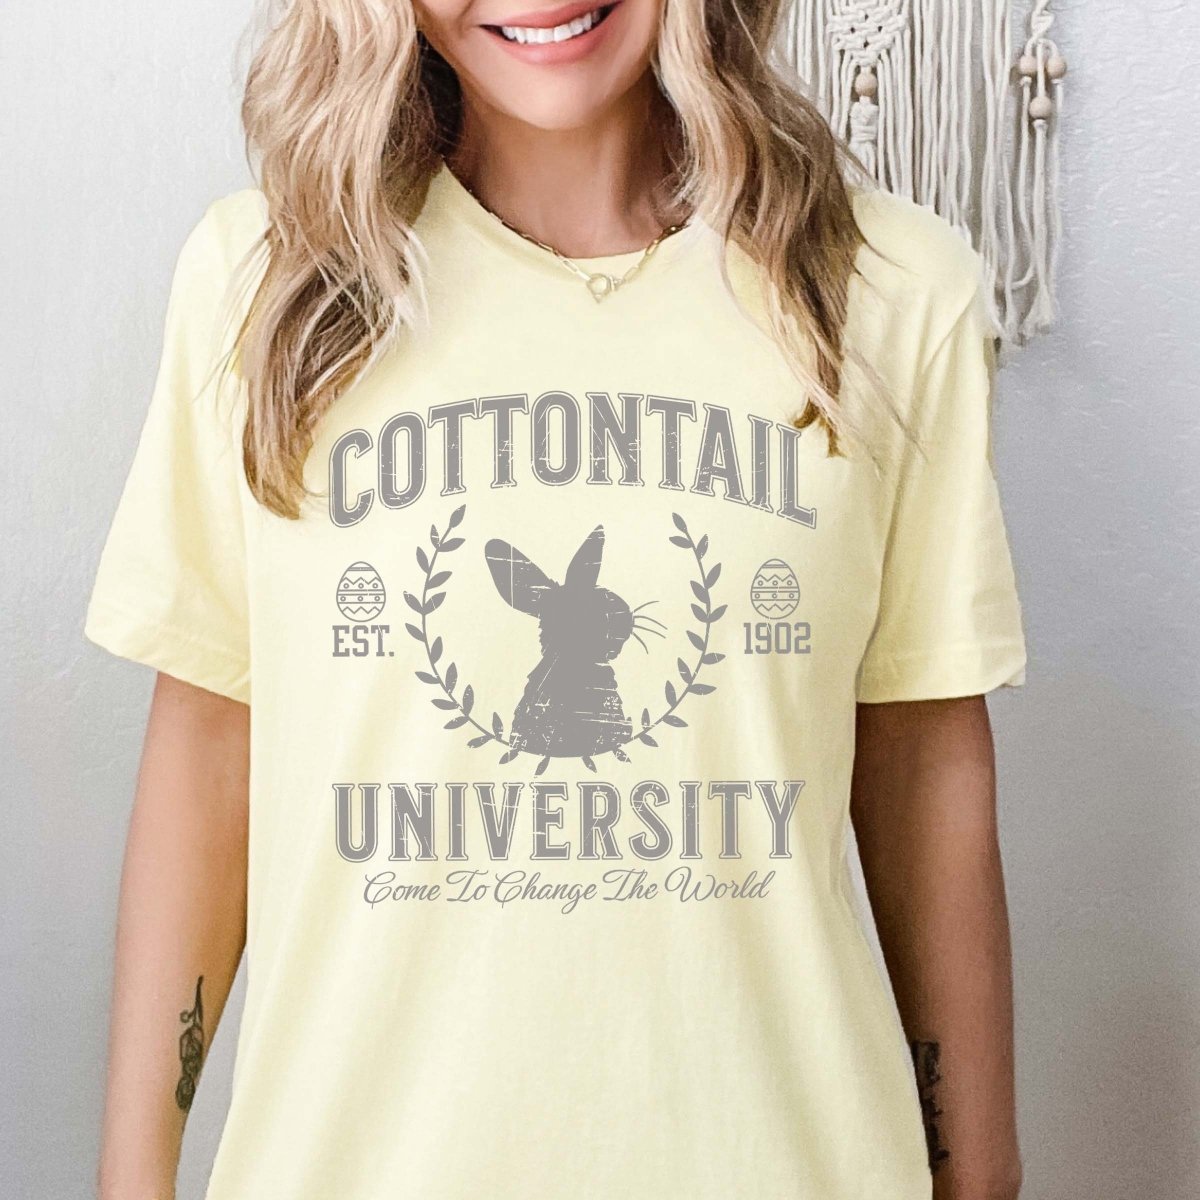 Cottontail University Tee - Limeberry Designs